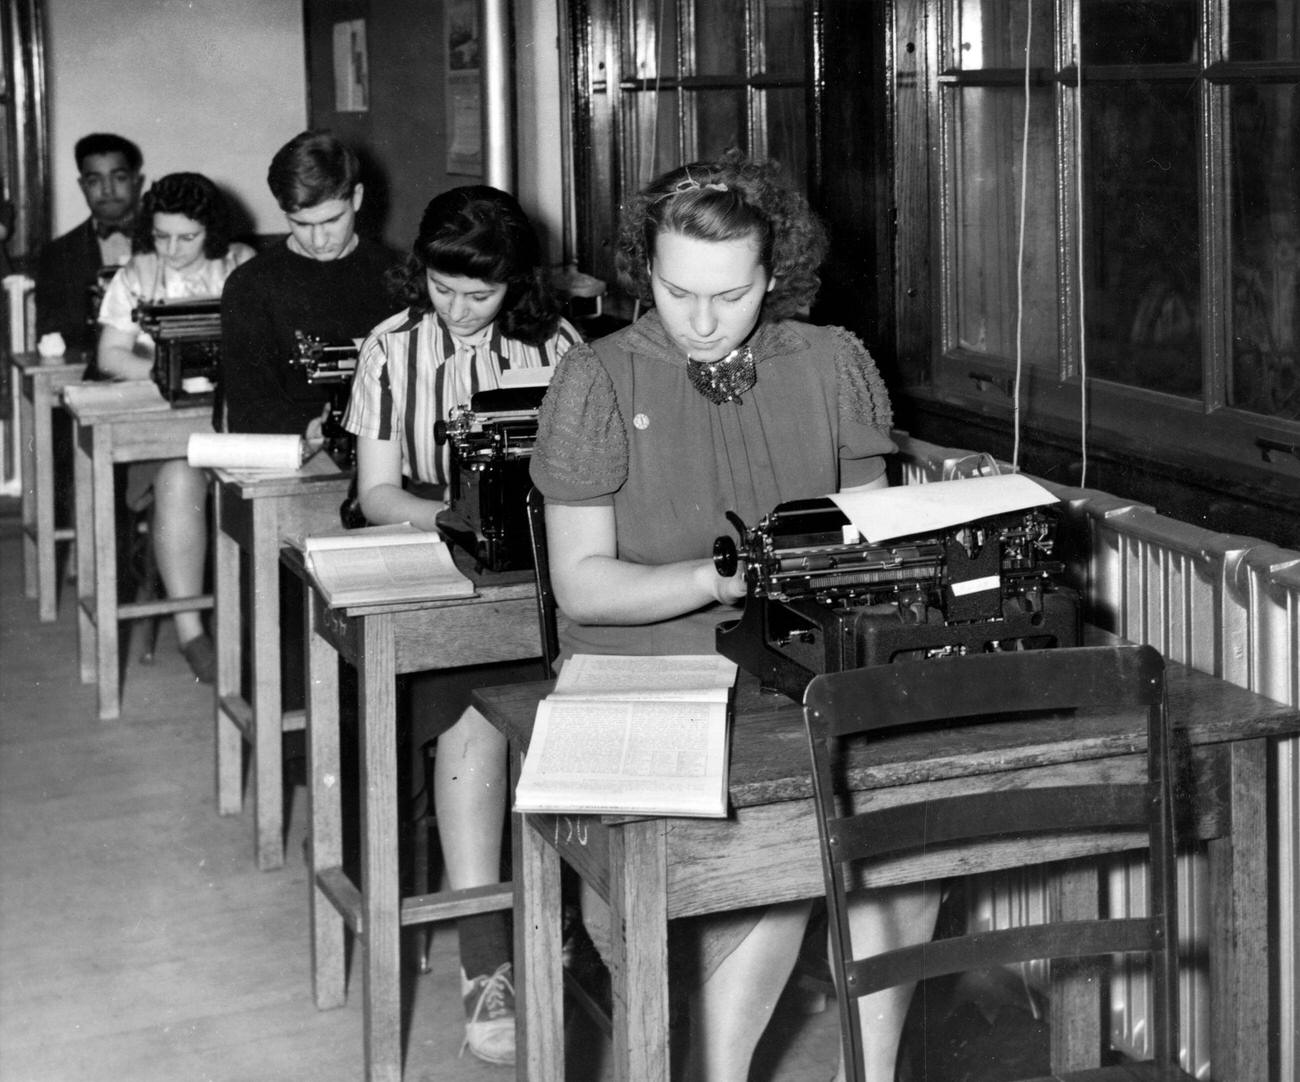 Students practicing touch typing at Hutchinson Central High School, Buffalo, New York, circa 1930.